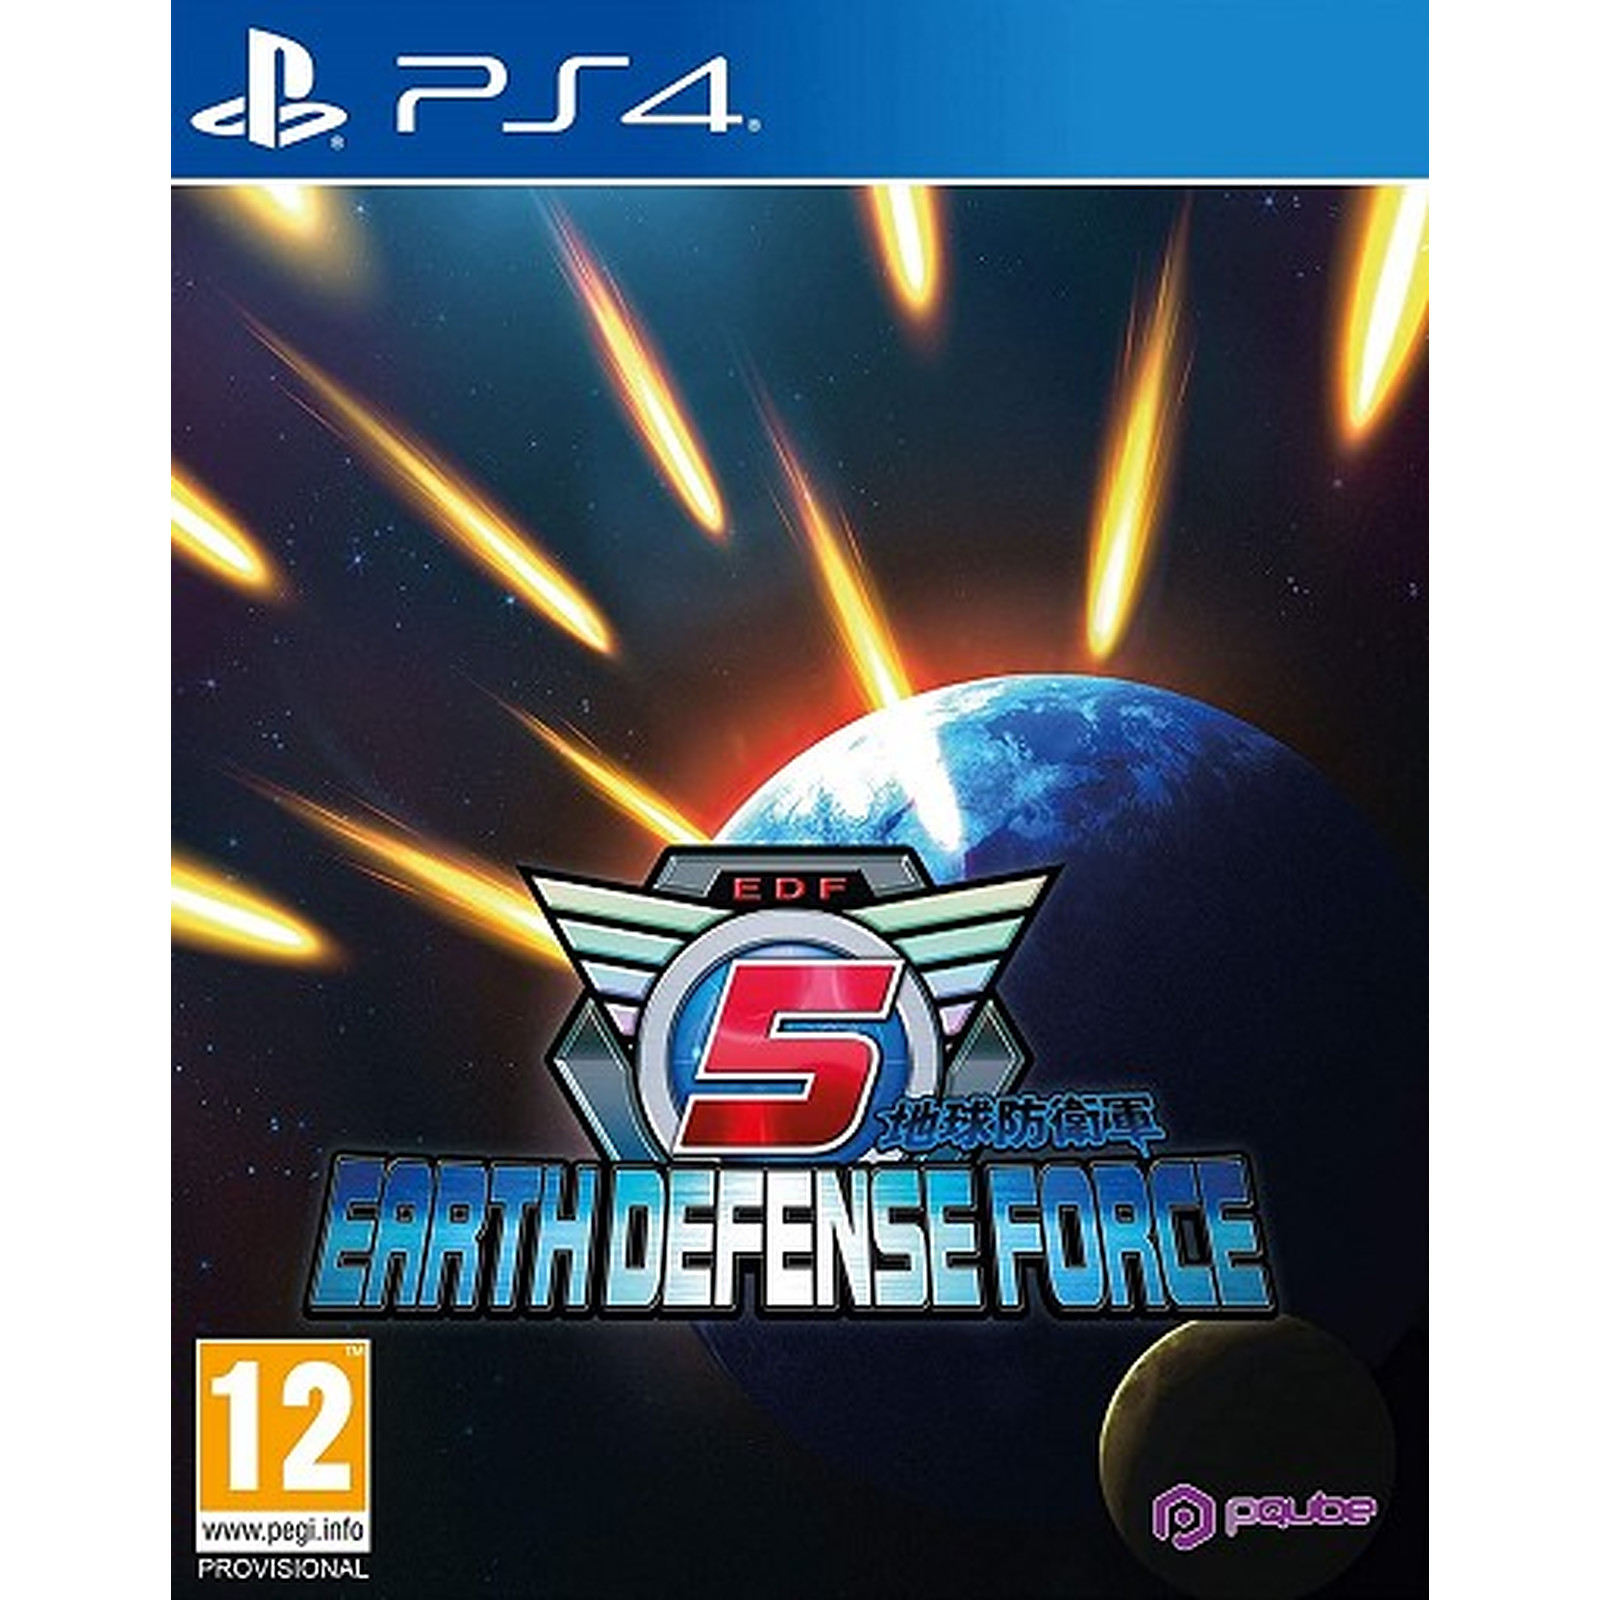 Earth Defense Force 5 (PS4) - Jeux PS4 PQUBE